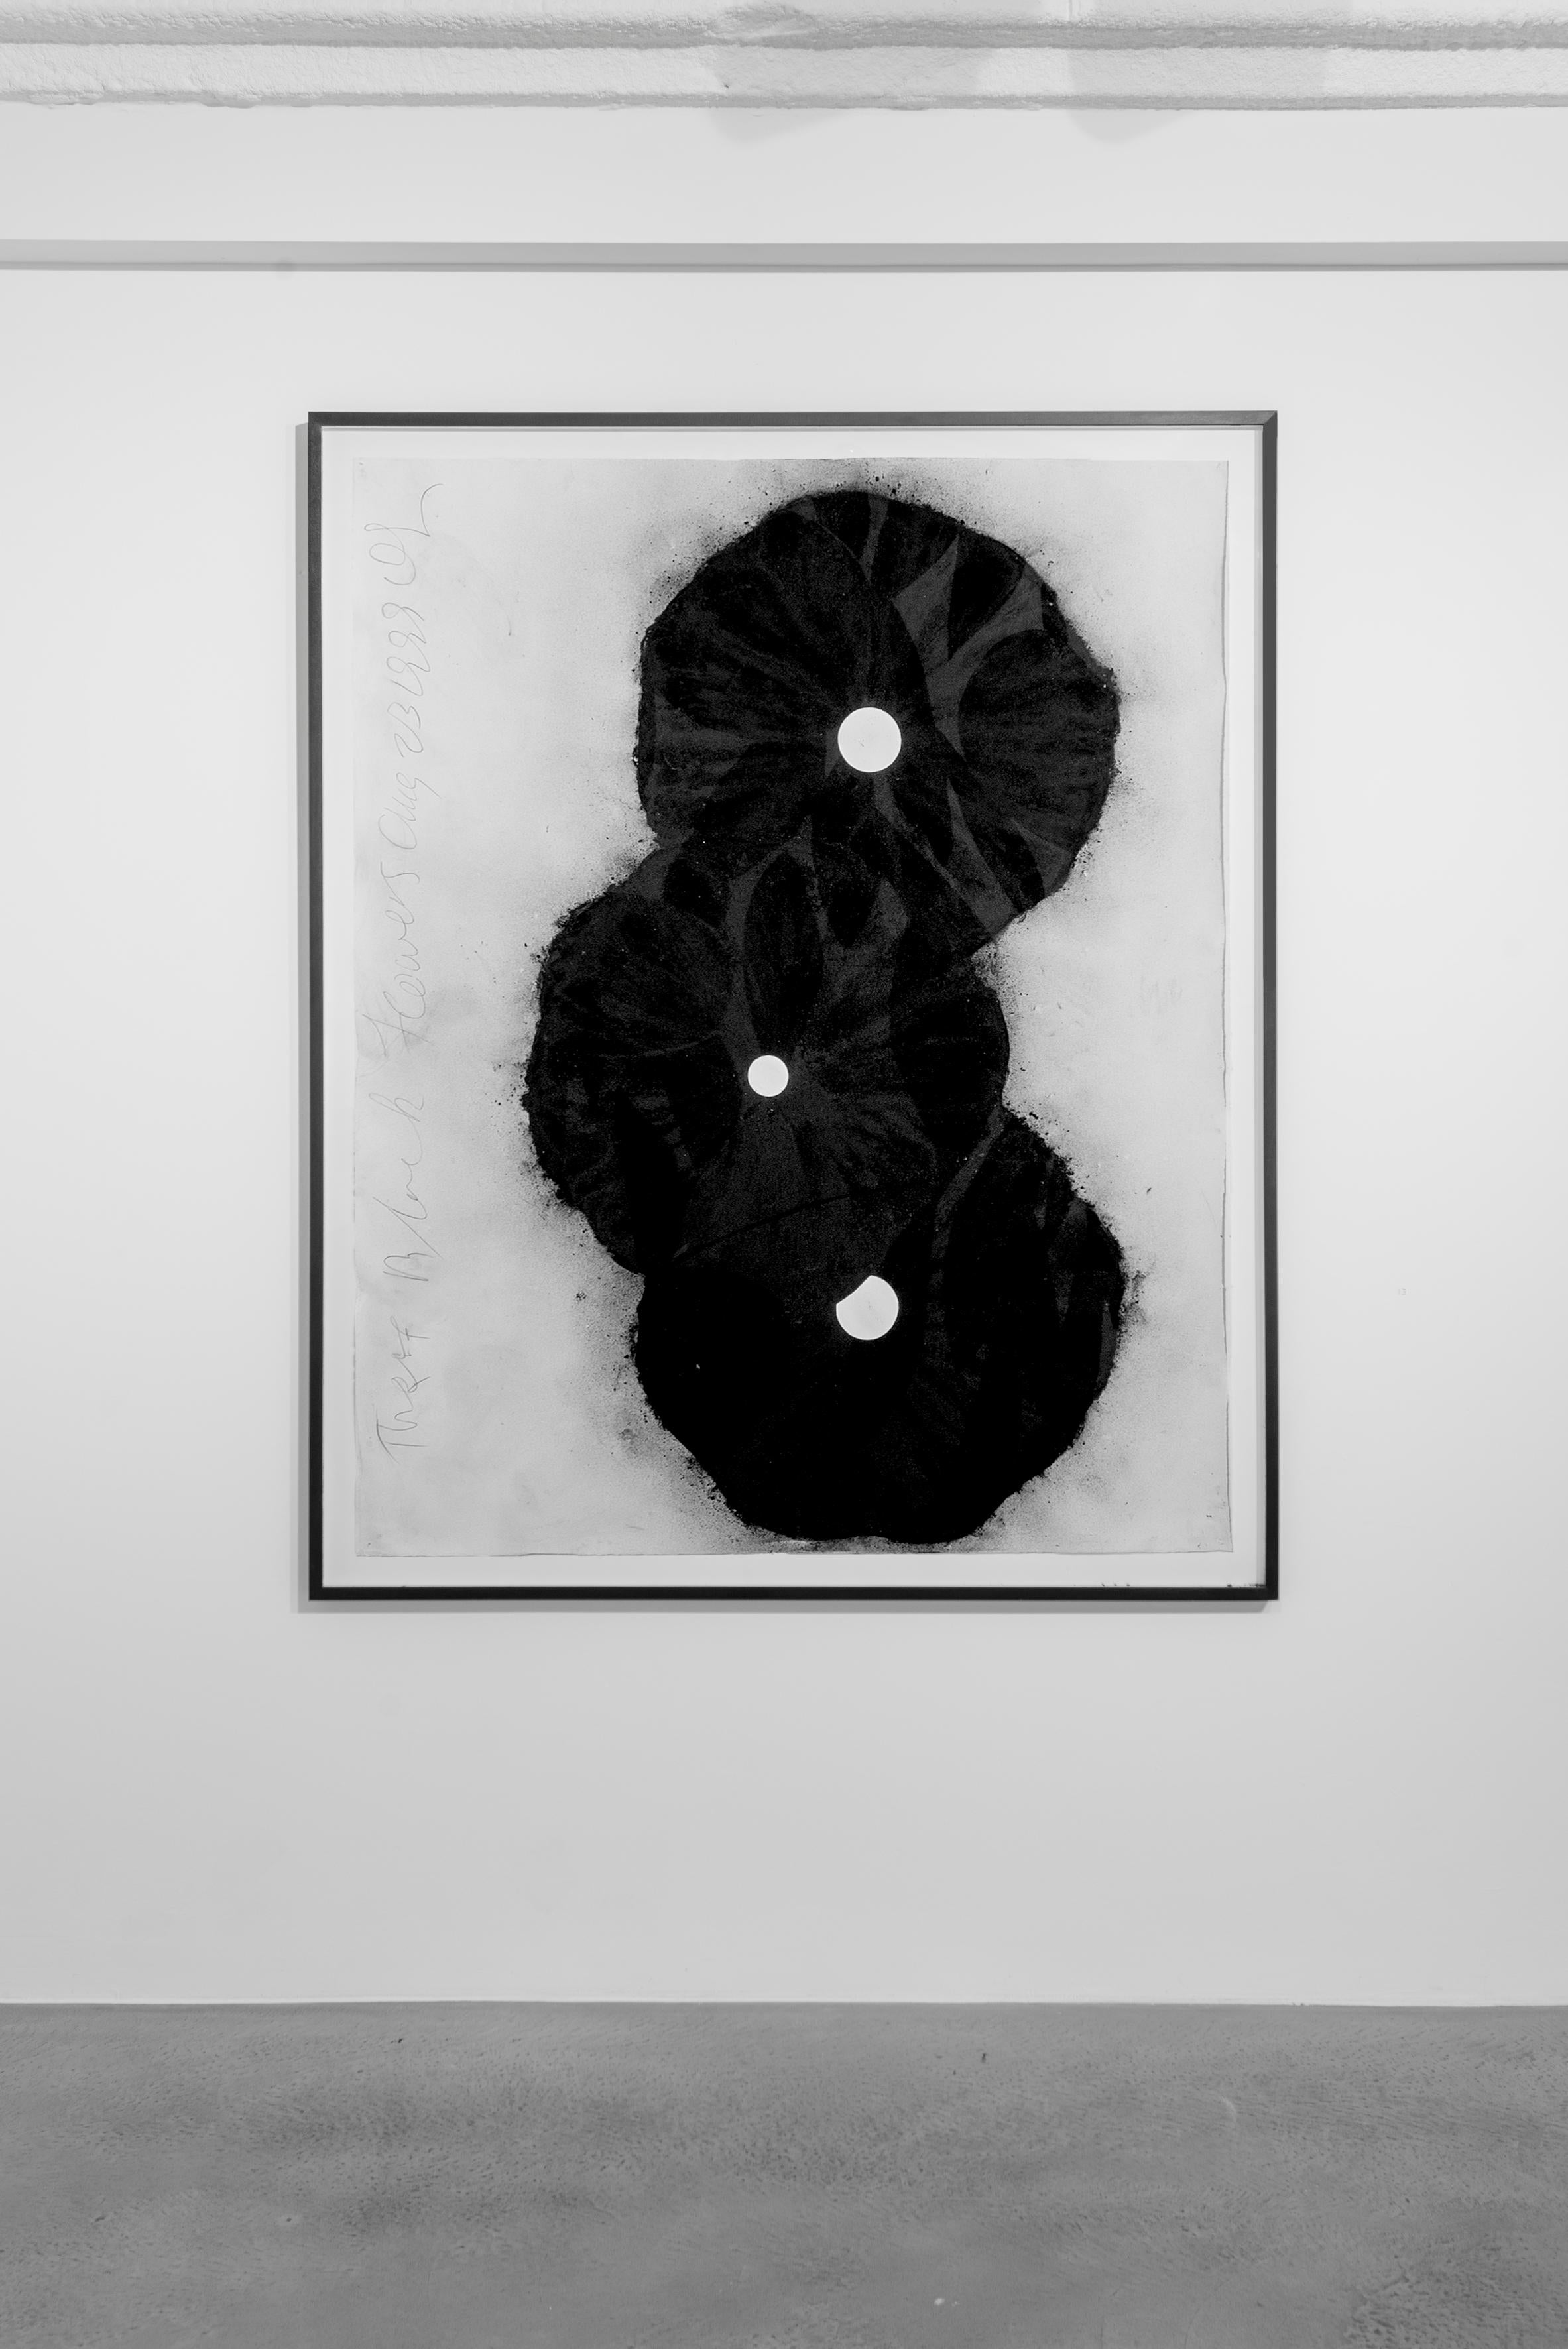 Donald Sultan
Born 1951  
Three Black Flowers, 23 August 1995
Charcoal on paper
60 x 48 inches

Donald Sultan is an acclaimed American painter known for his large-scale paintings produced using a range of industrial and non-art materials, including